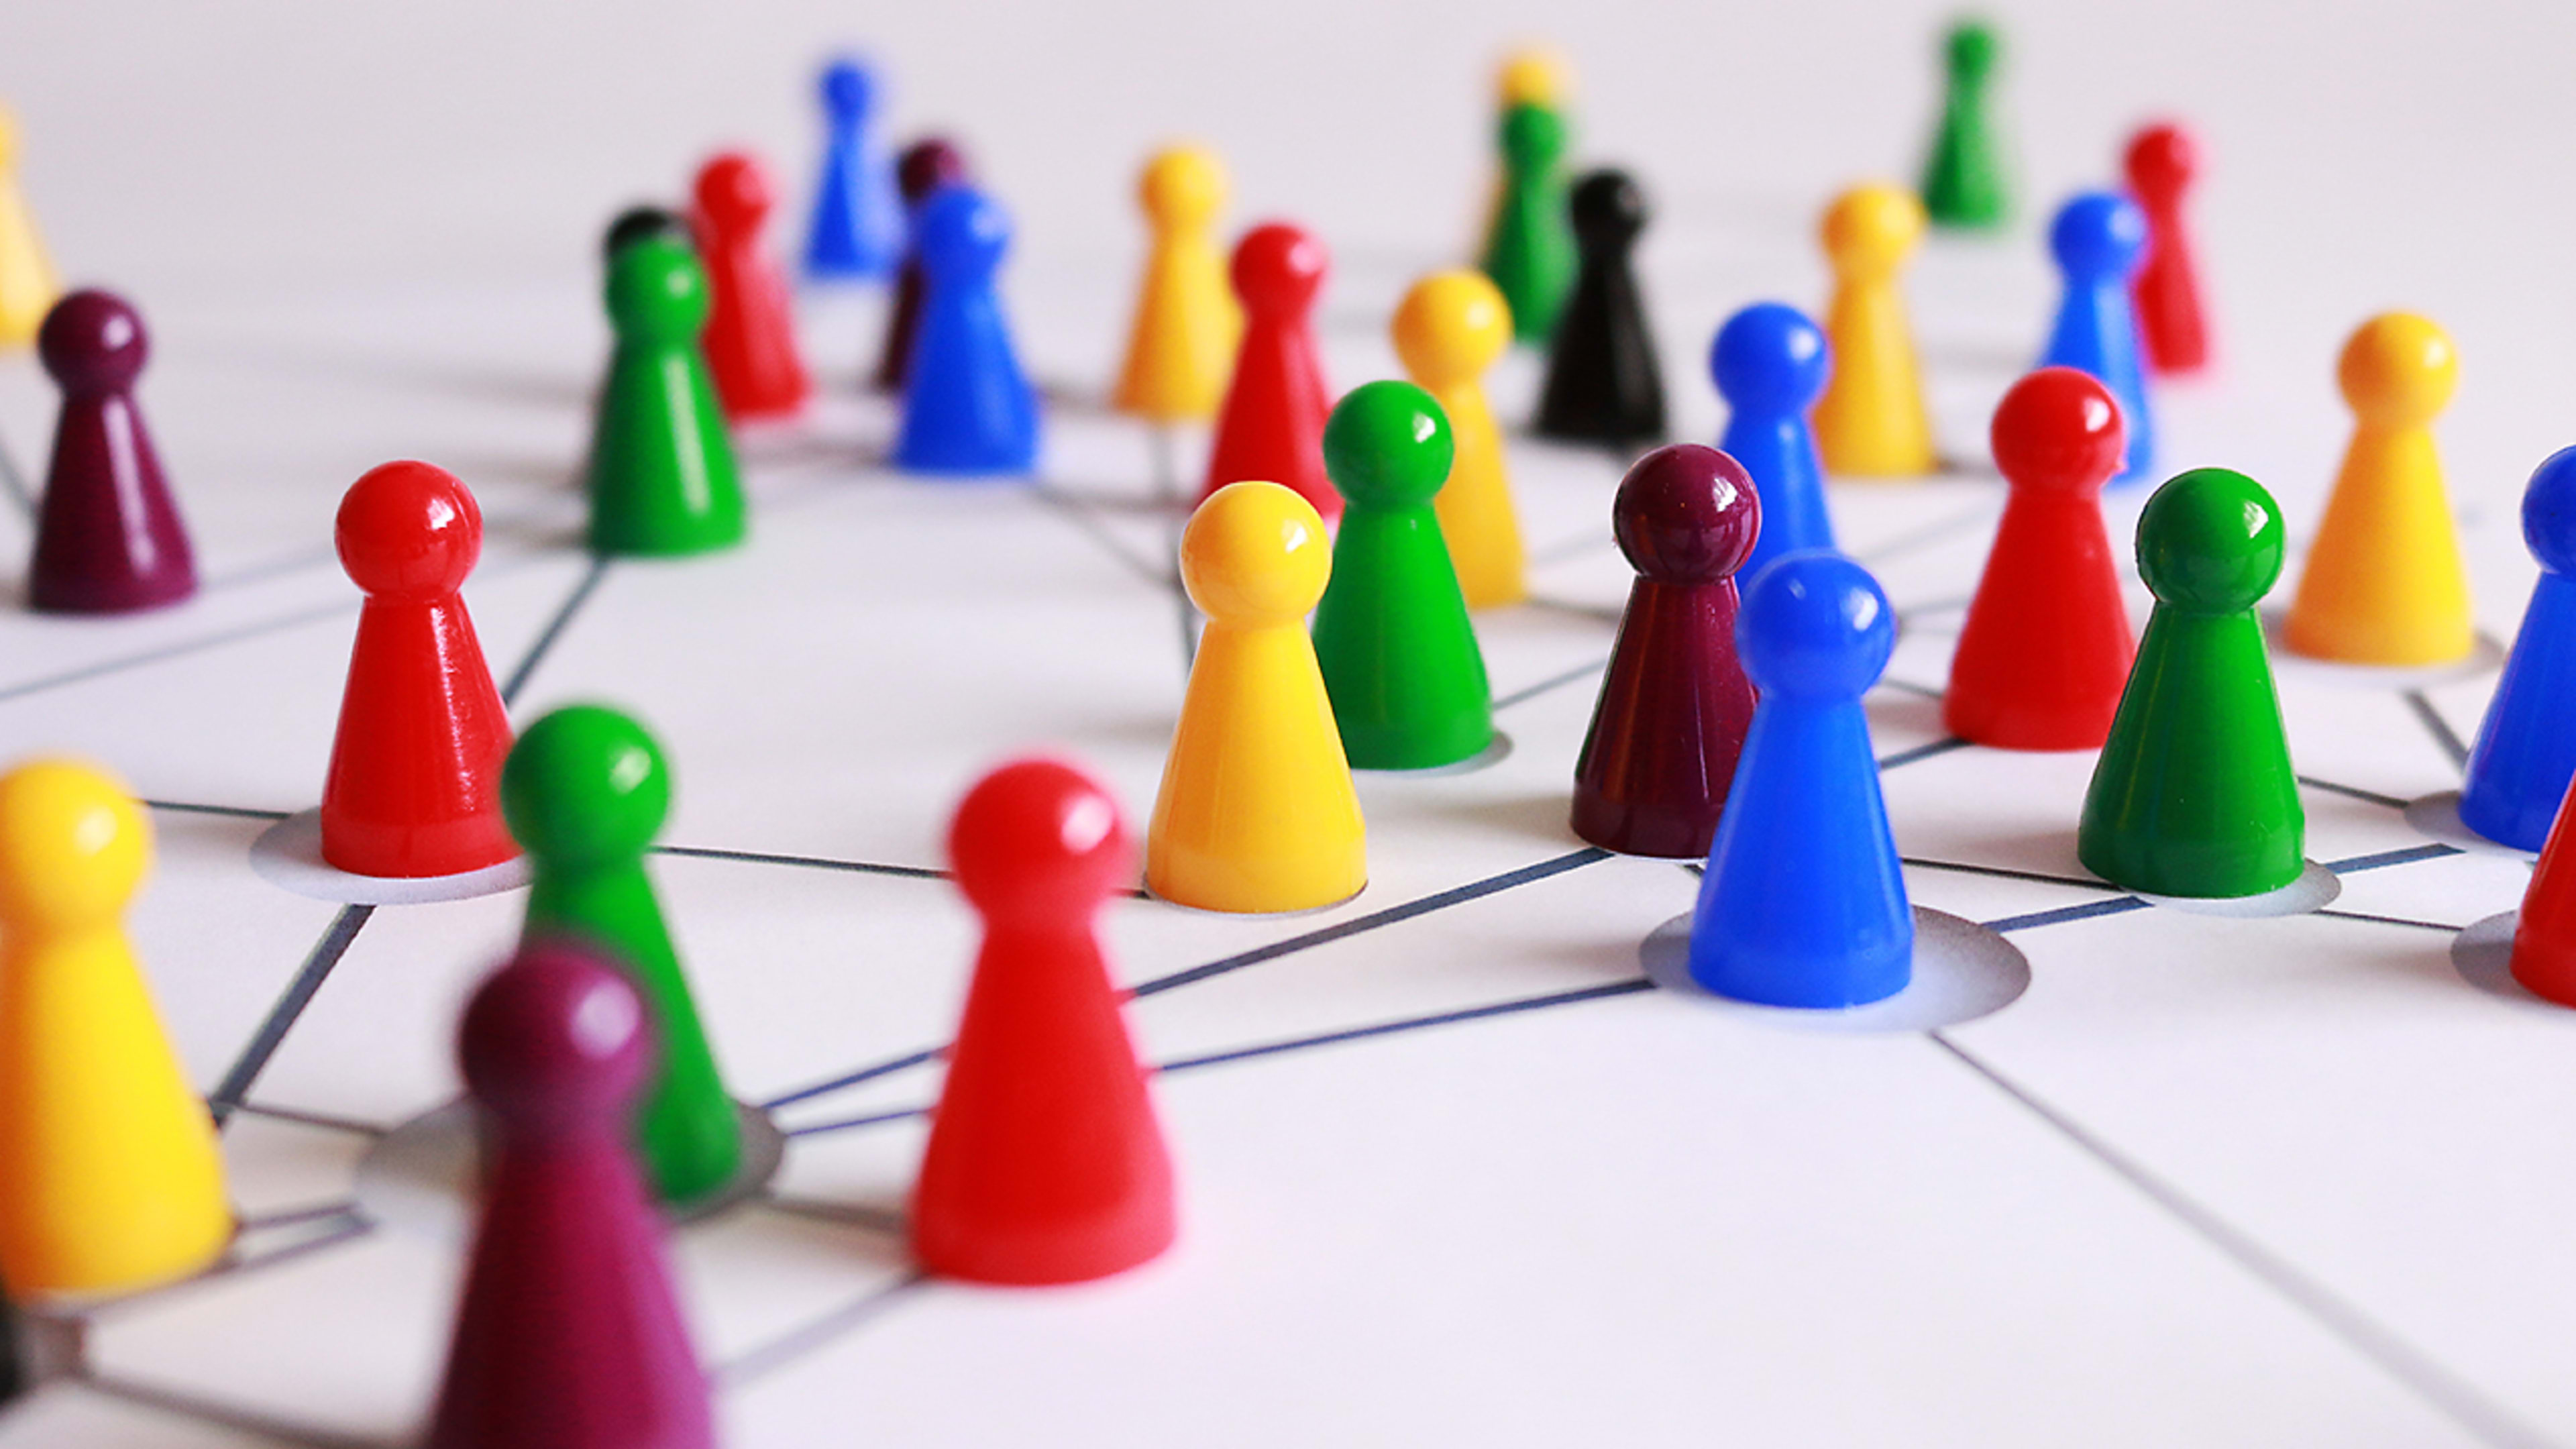 5 types of connections you need in your LinkedIn network